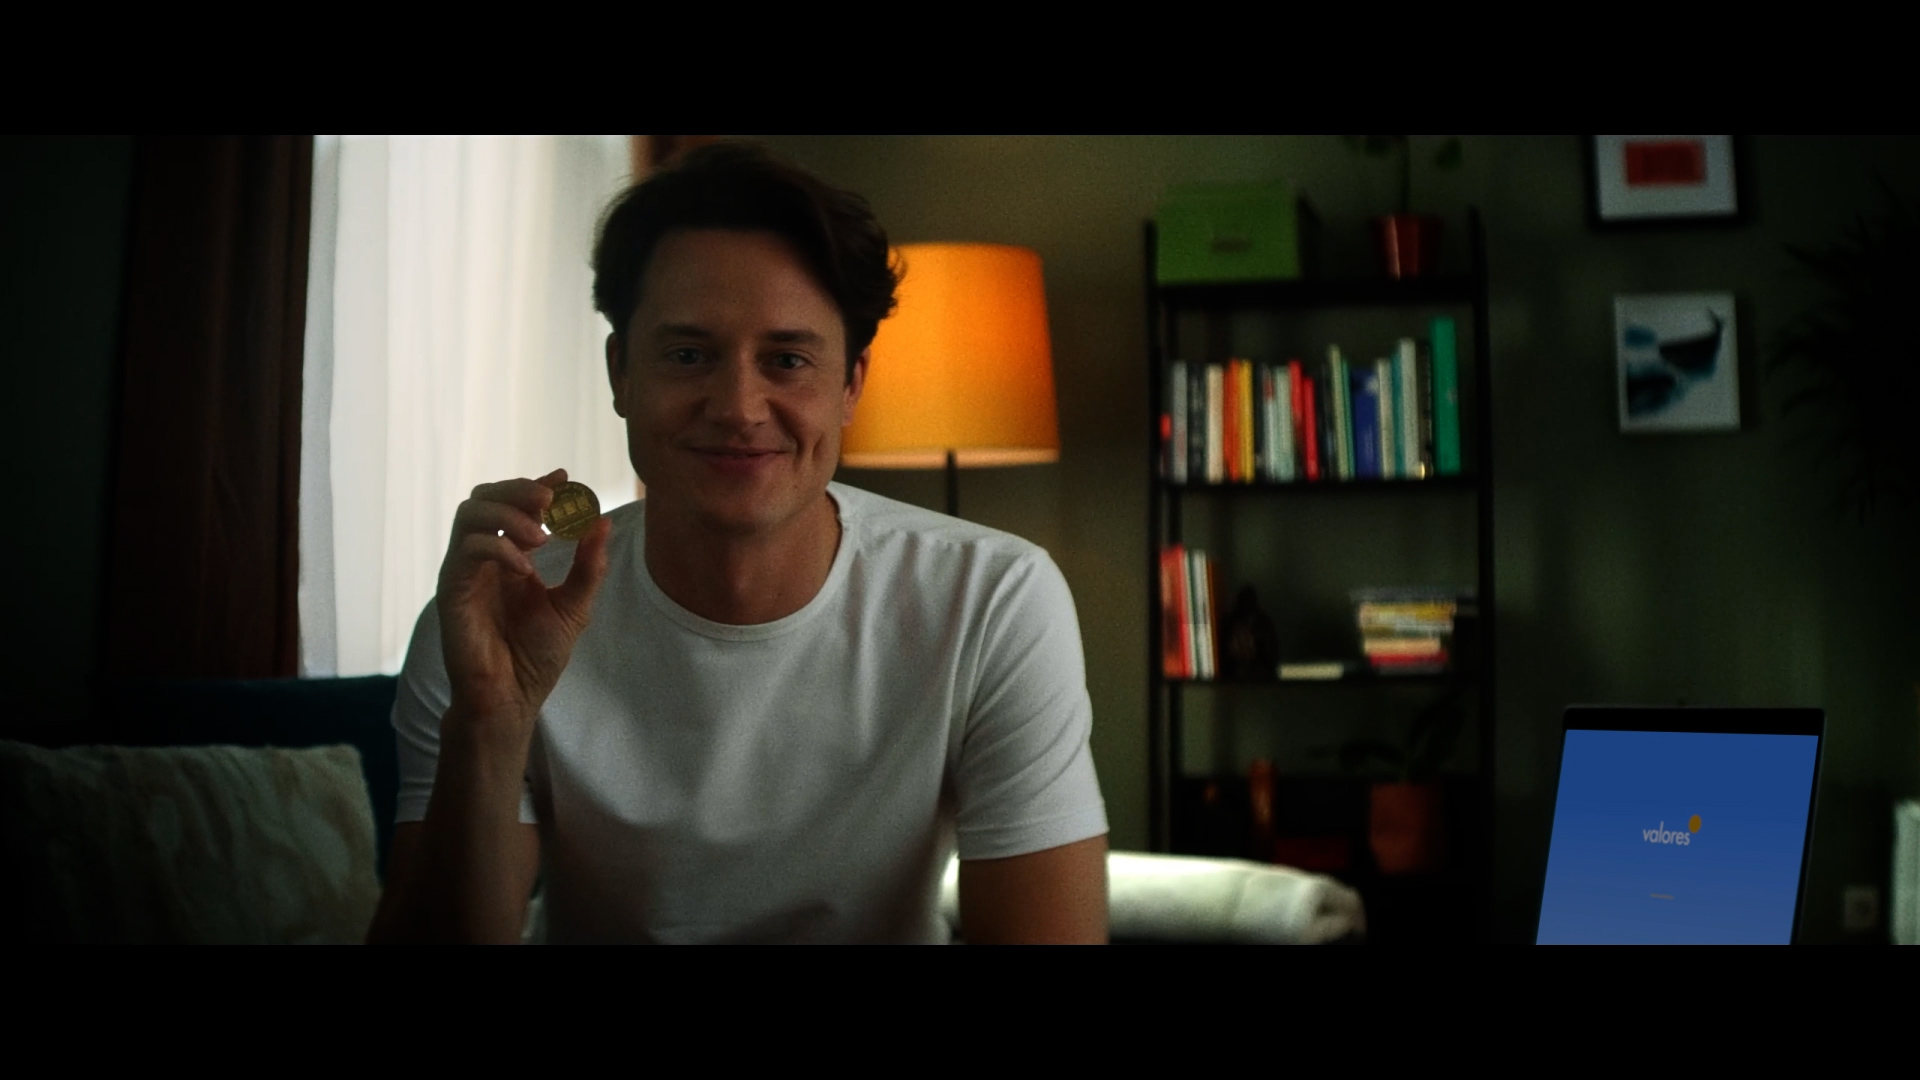 Domen Valič, actor and a celebrity starring in a video advertisement ad, holding a gold coin in hand, explaining the importance of investing in gold.